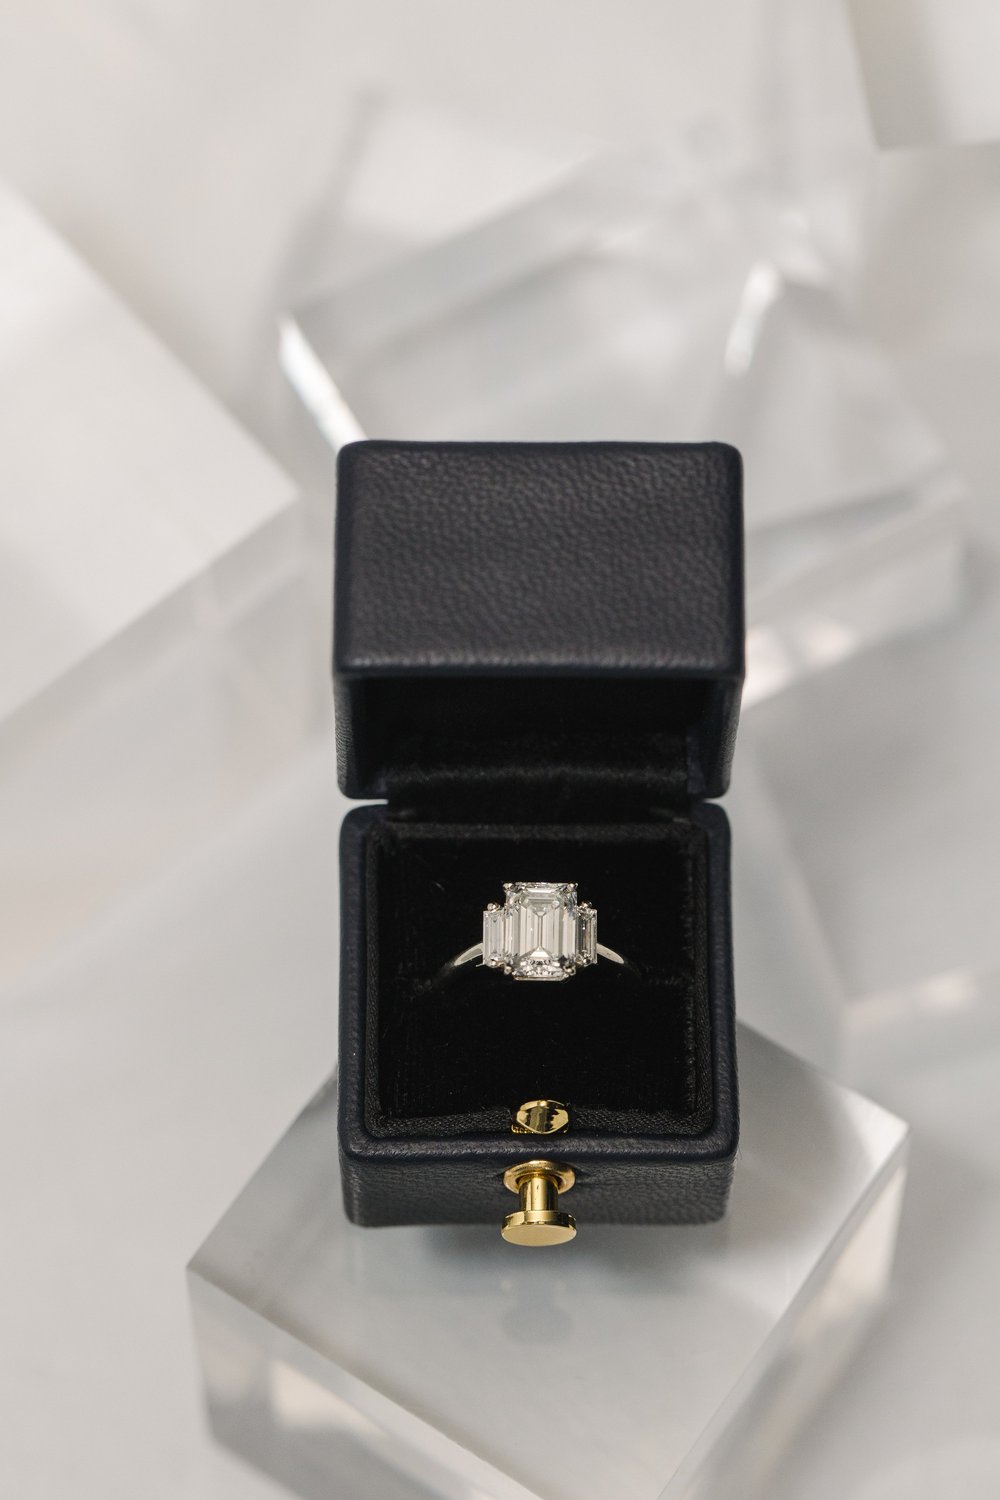 Emerald cut three stone engagement ring custom designed by Alexandria &amp; Company in Old Town Alexandria